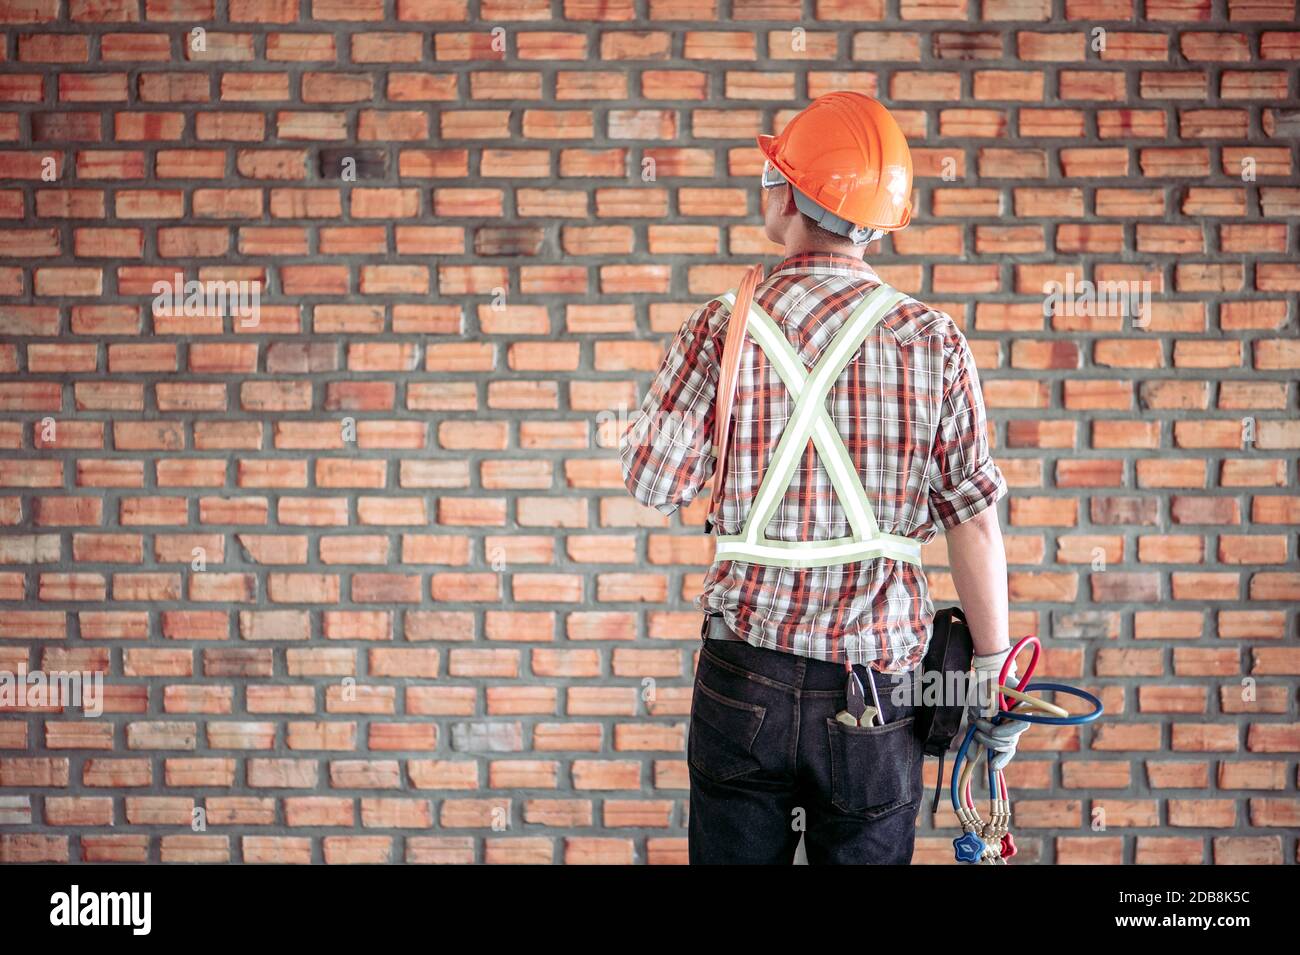 Rear view of an engineer on a construction site, Thailand Stock Photo